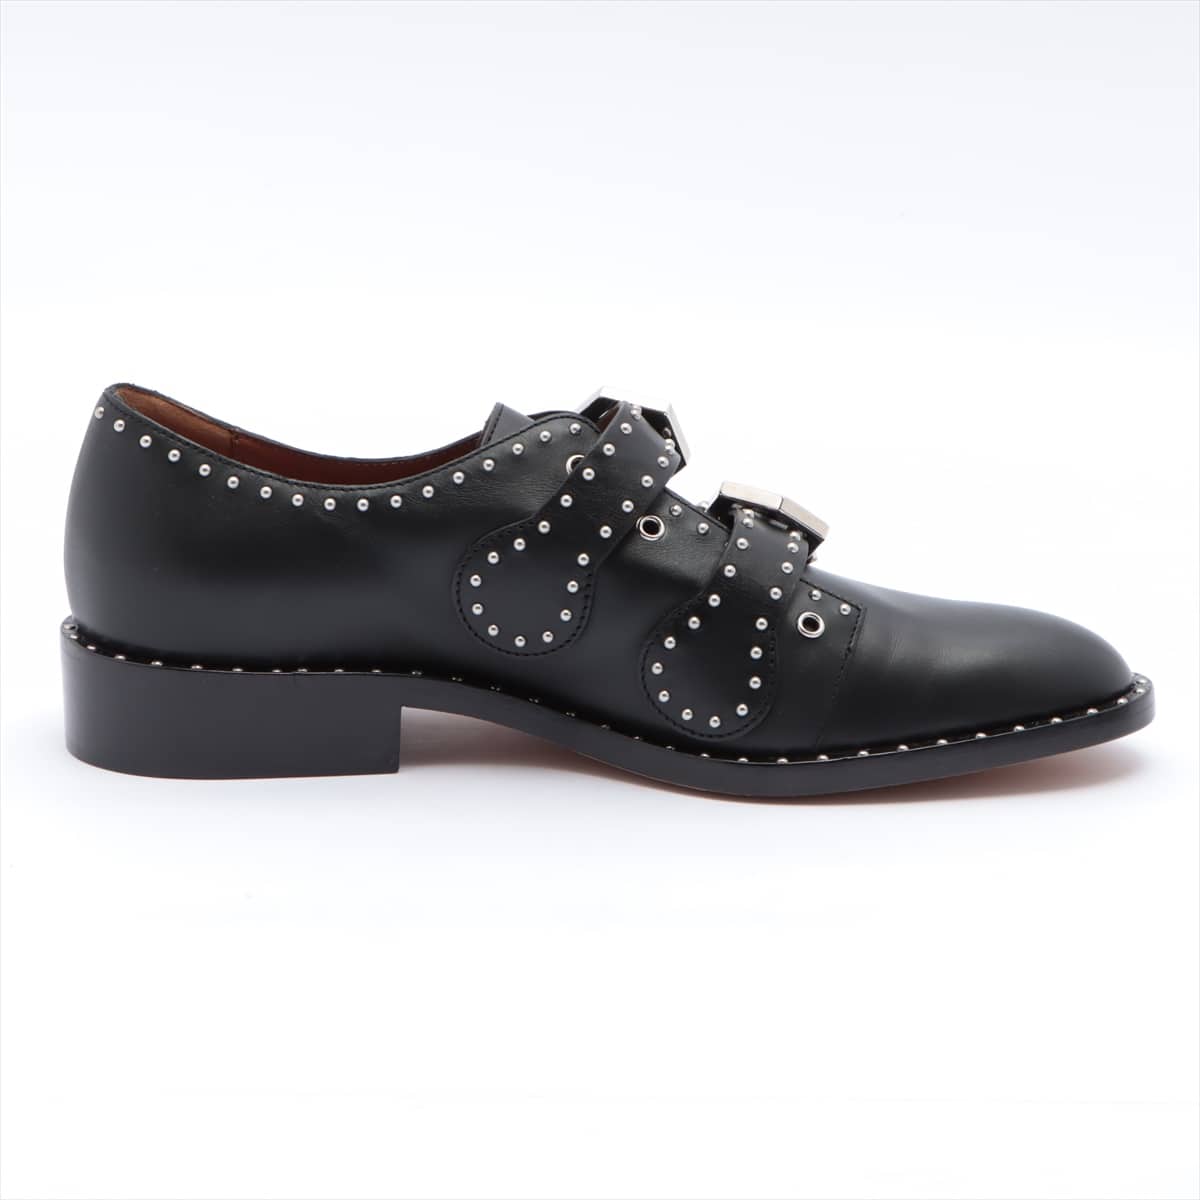 Givenchy Leather Leather shoes 39 Men's Black Studs